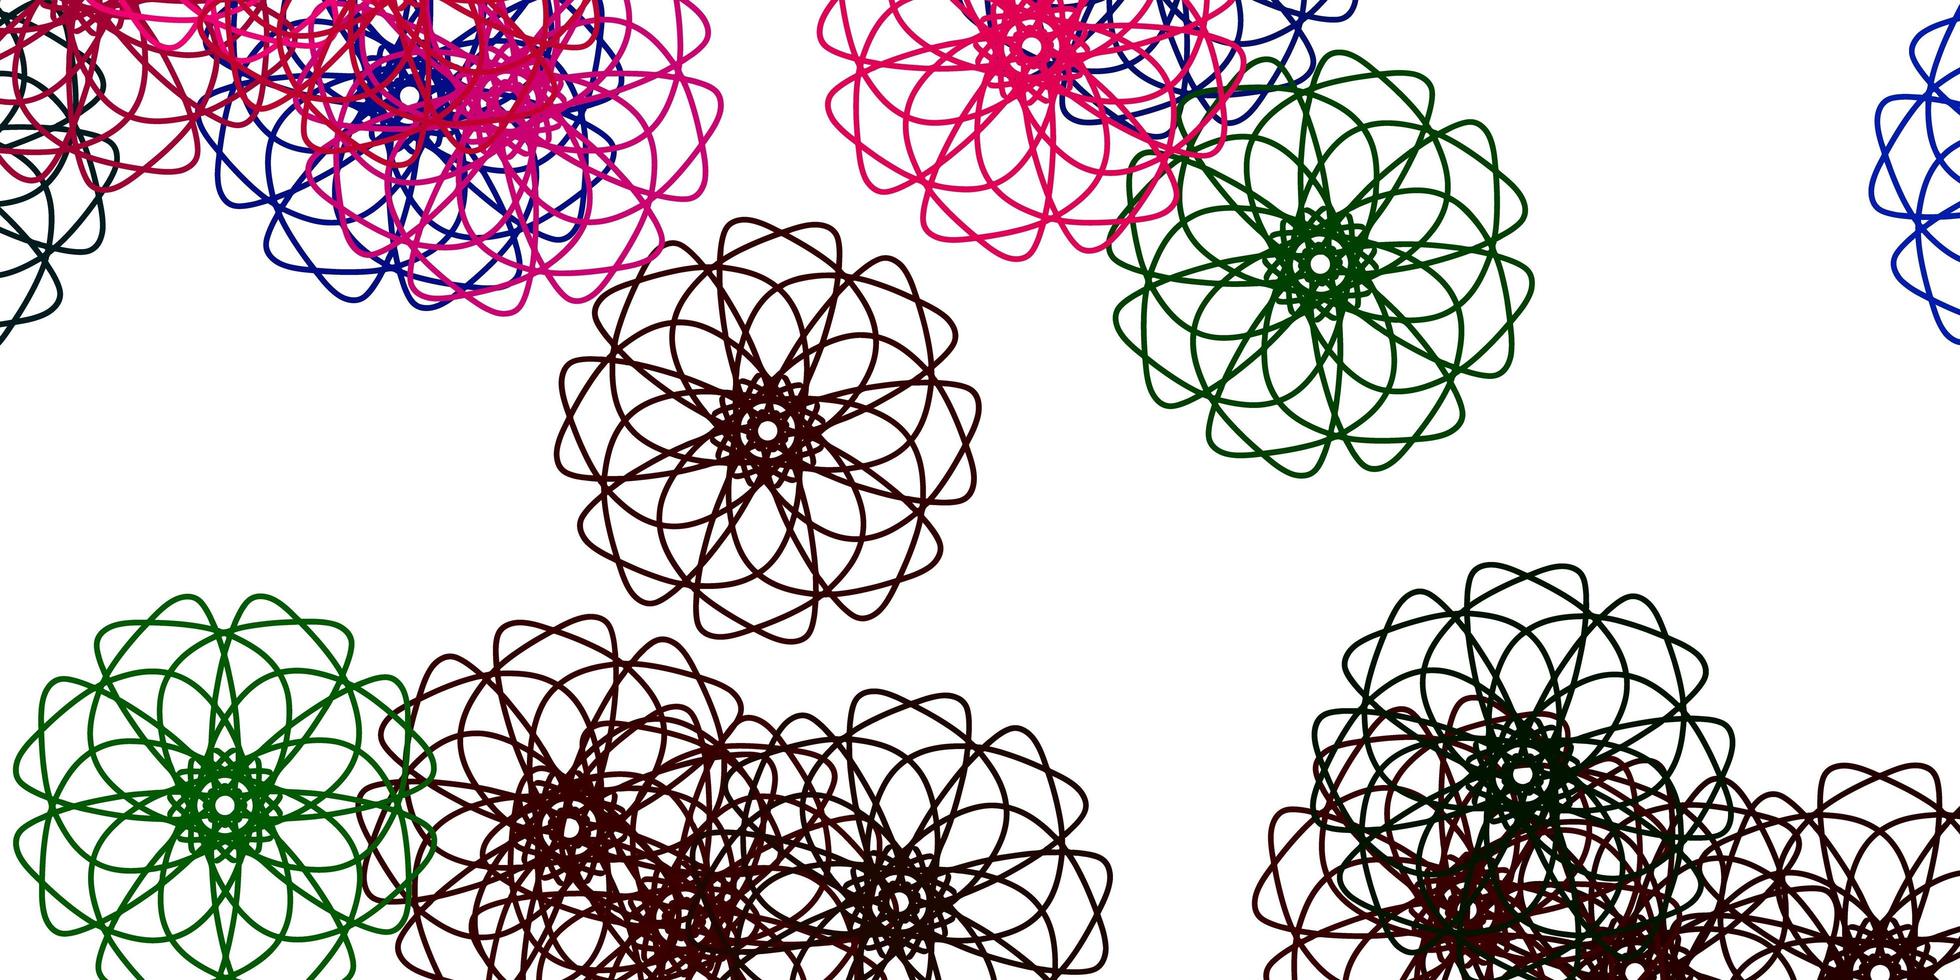 Light Multicolor vector doodle background with flowers.